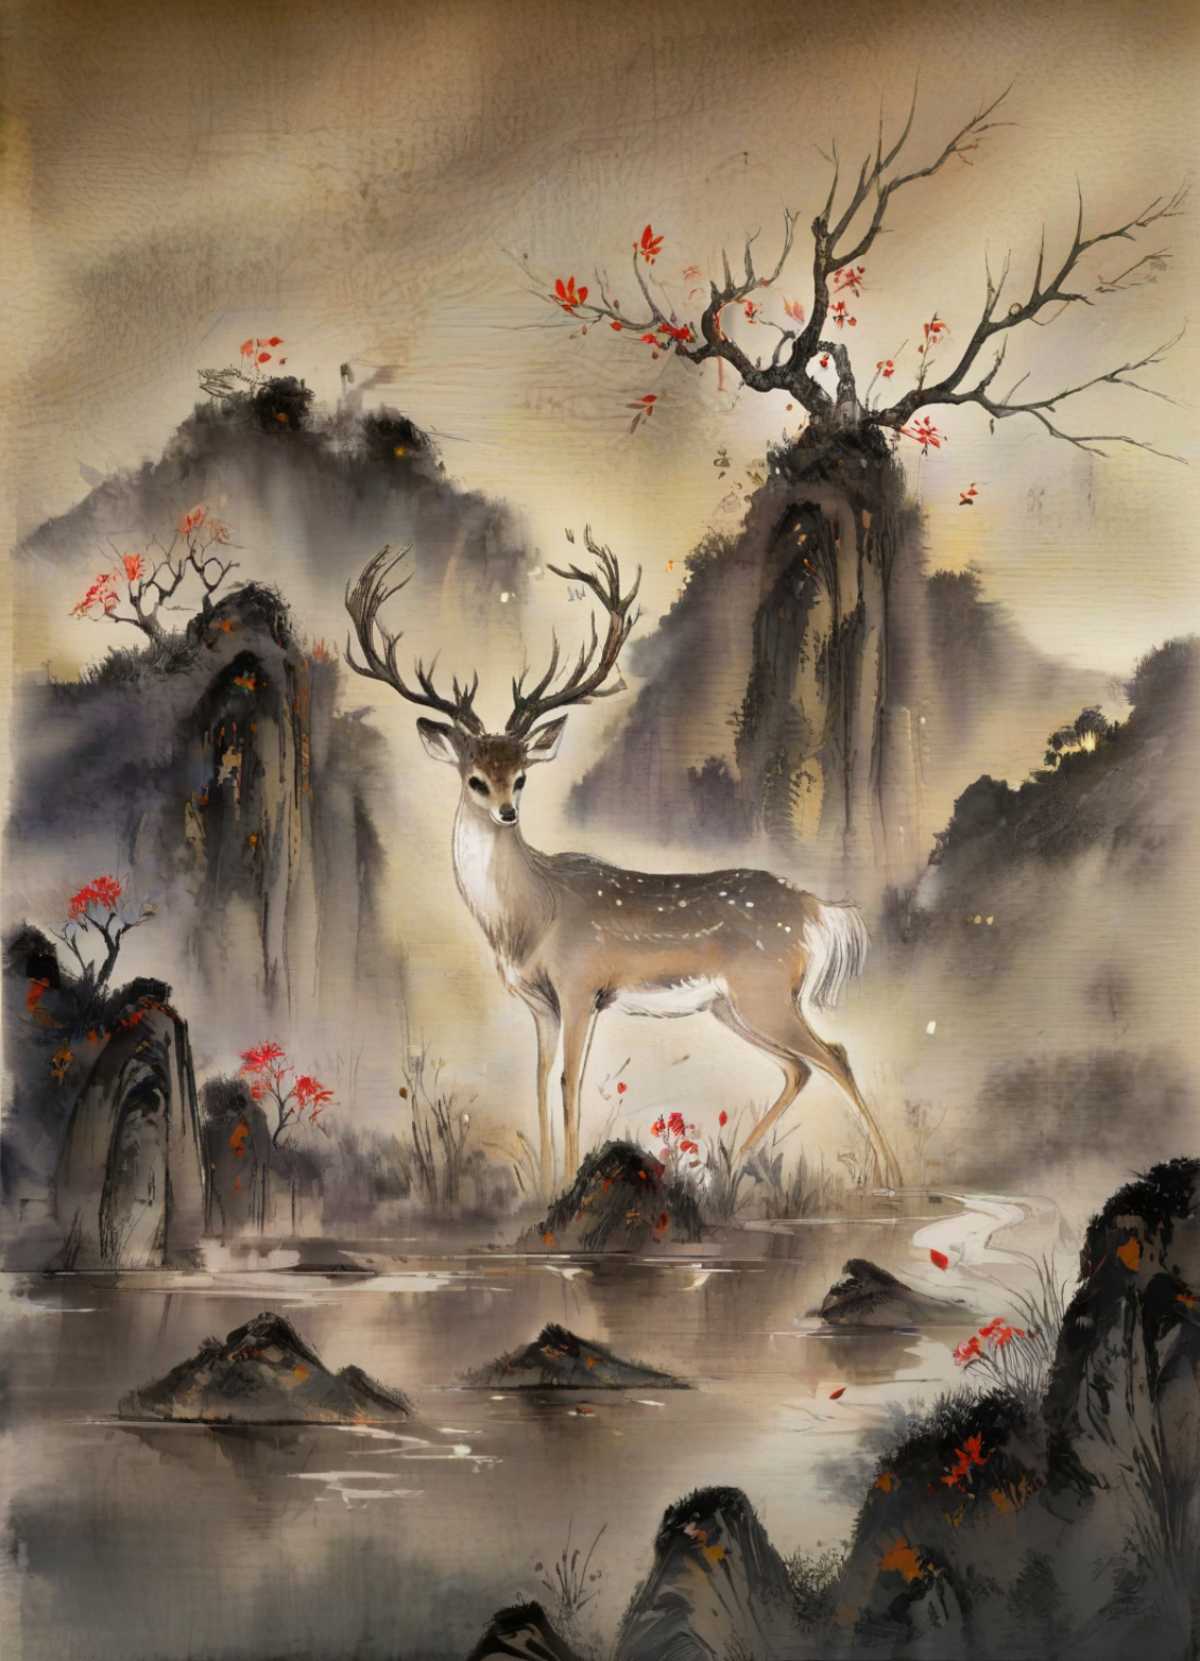 A deer standing in a pond surrounded by trees and flowers.